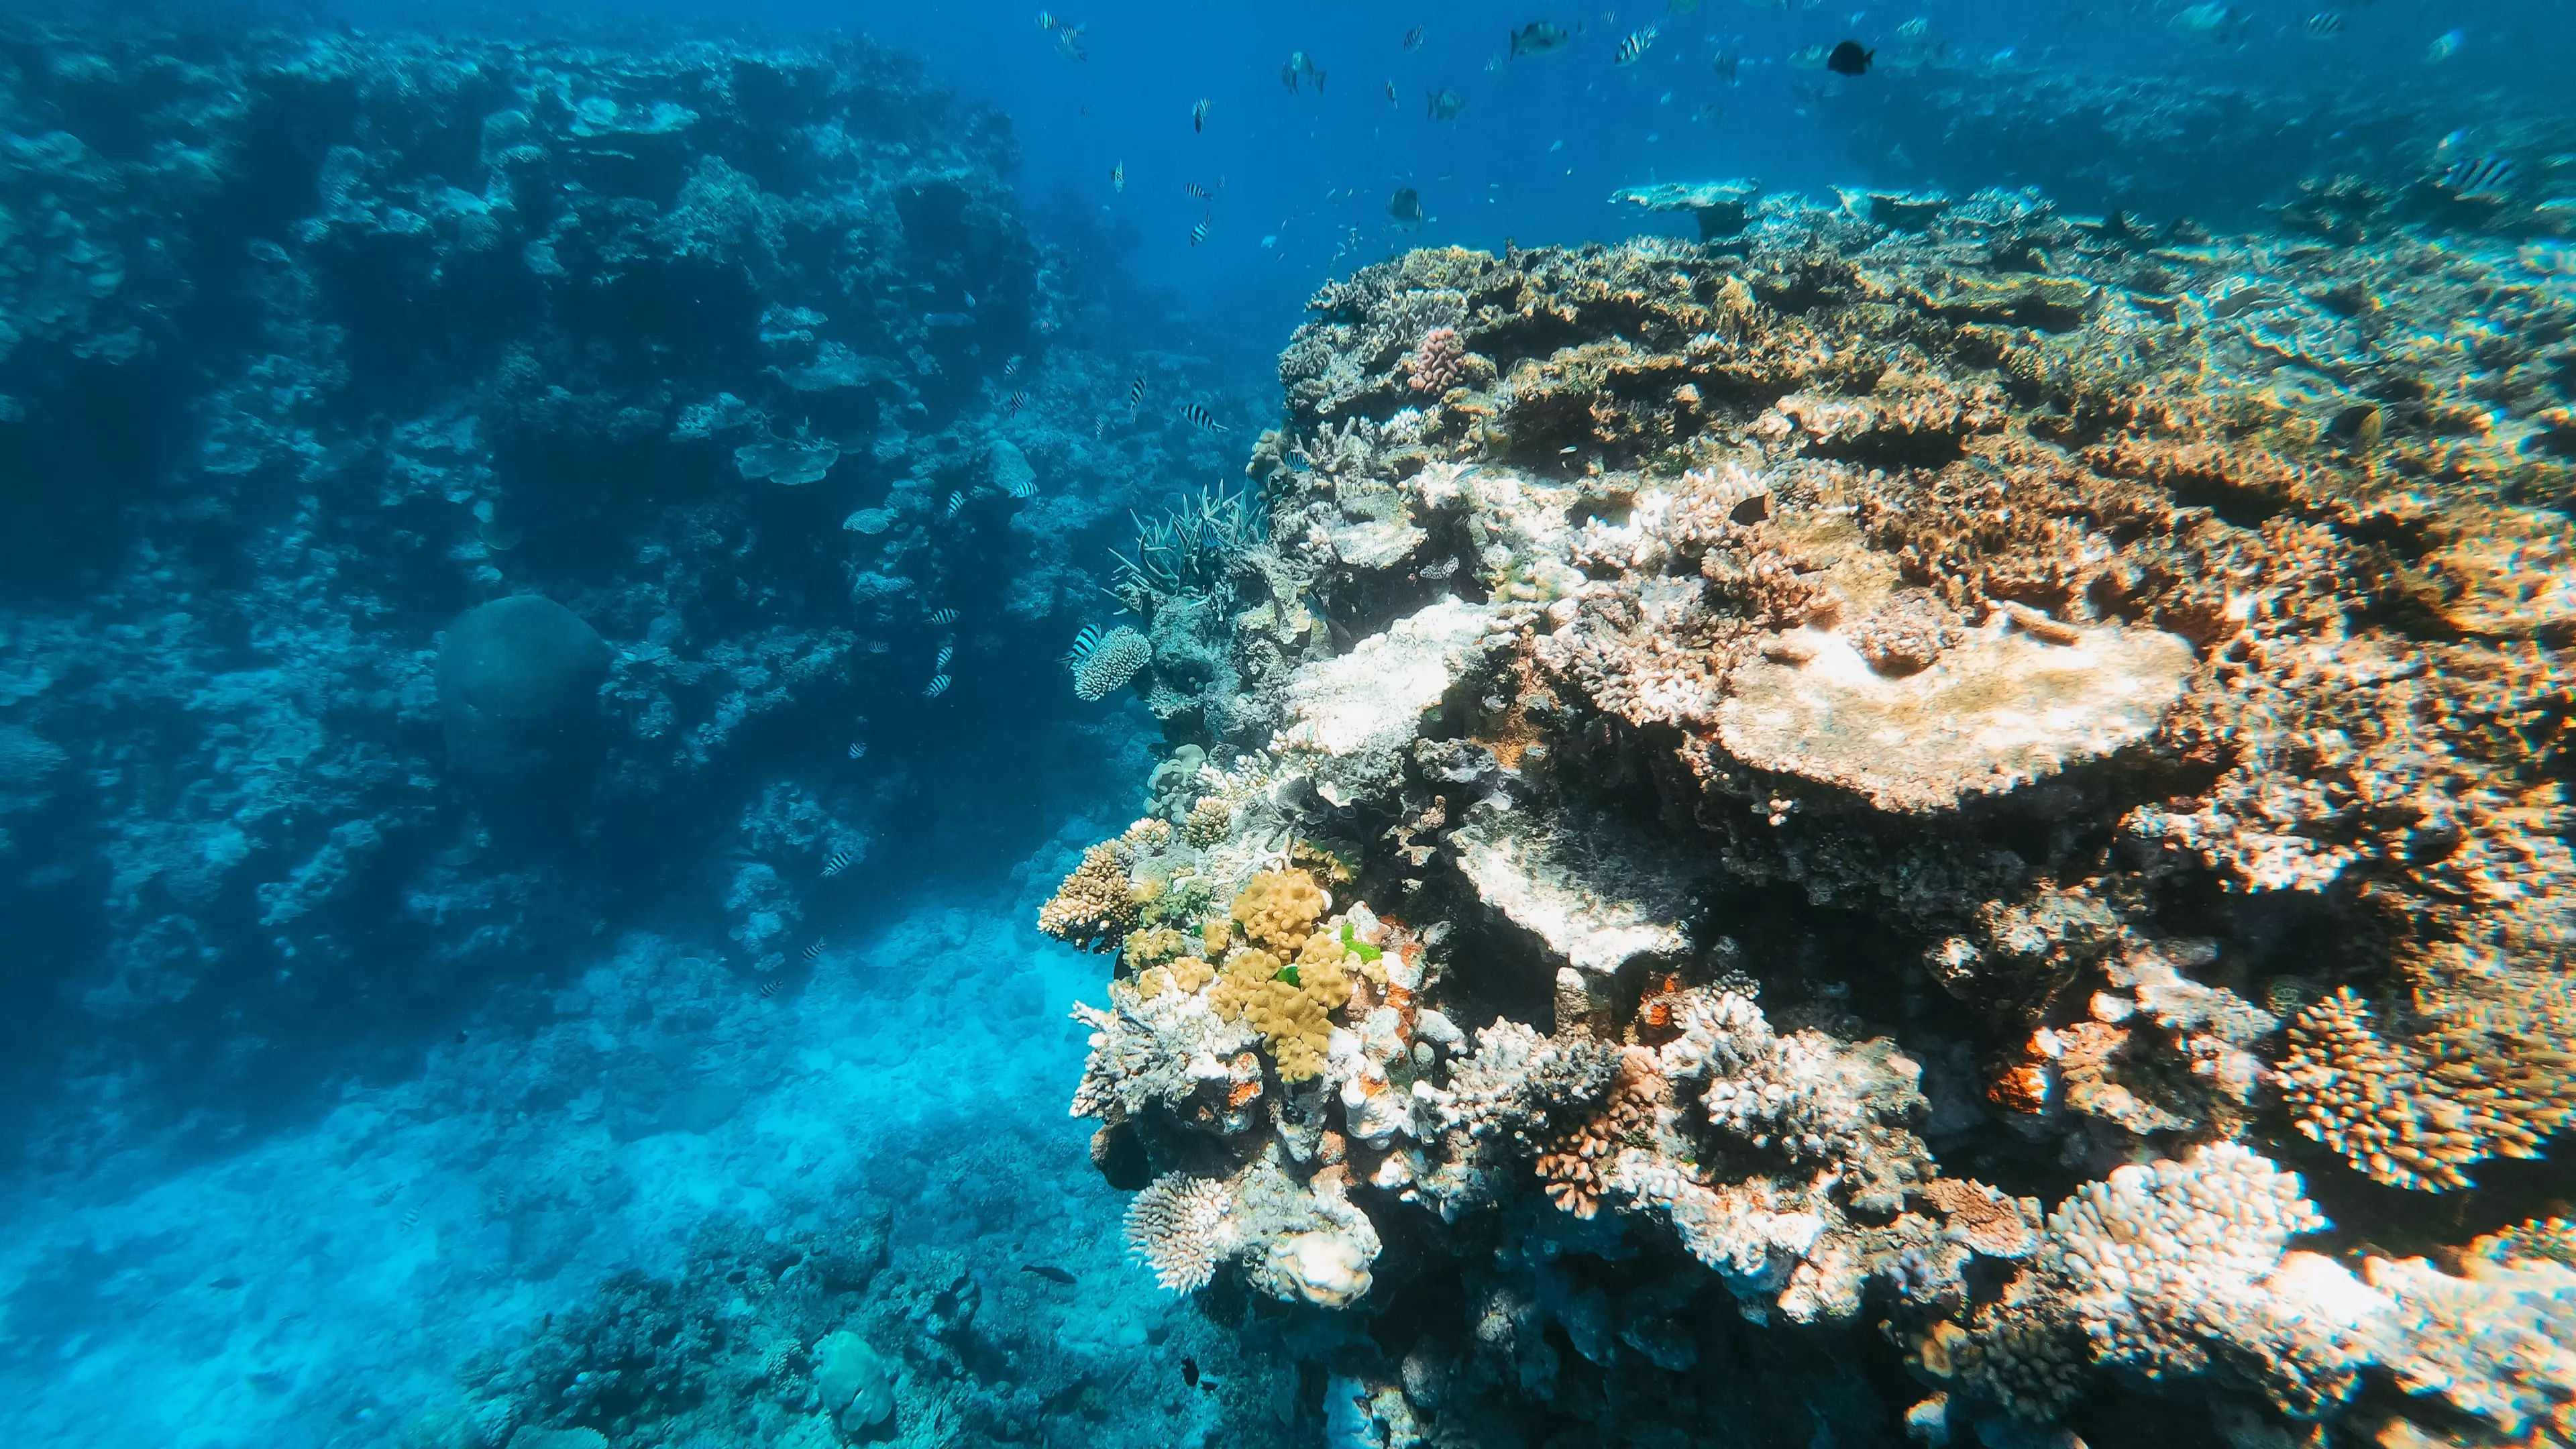 Australian University Students Now Have The Opportunity To Visit And Save Coral Reefs As Part Of Their Studies